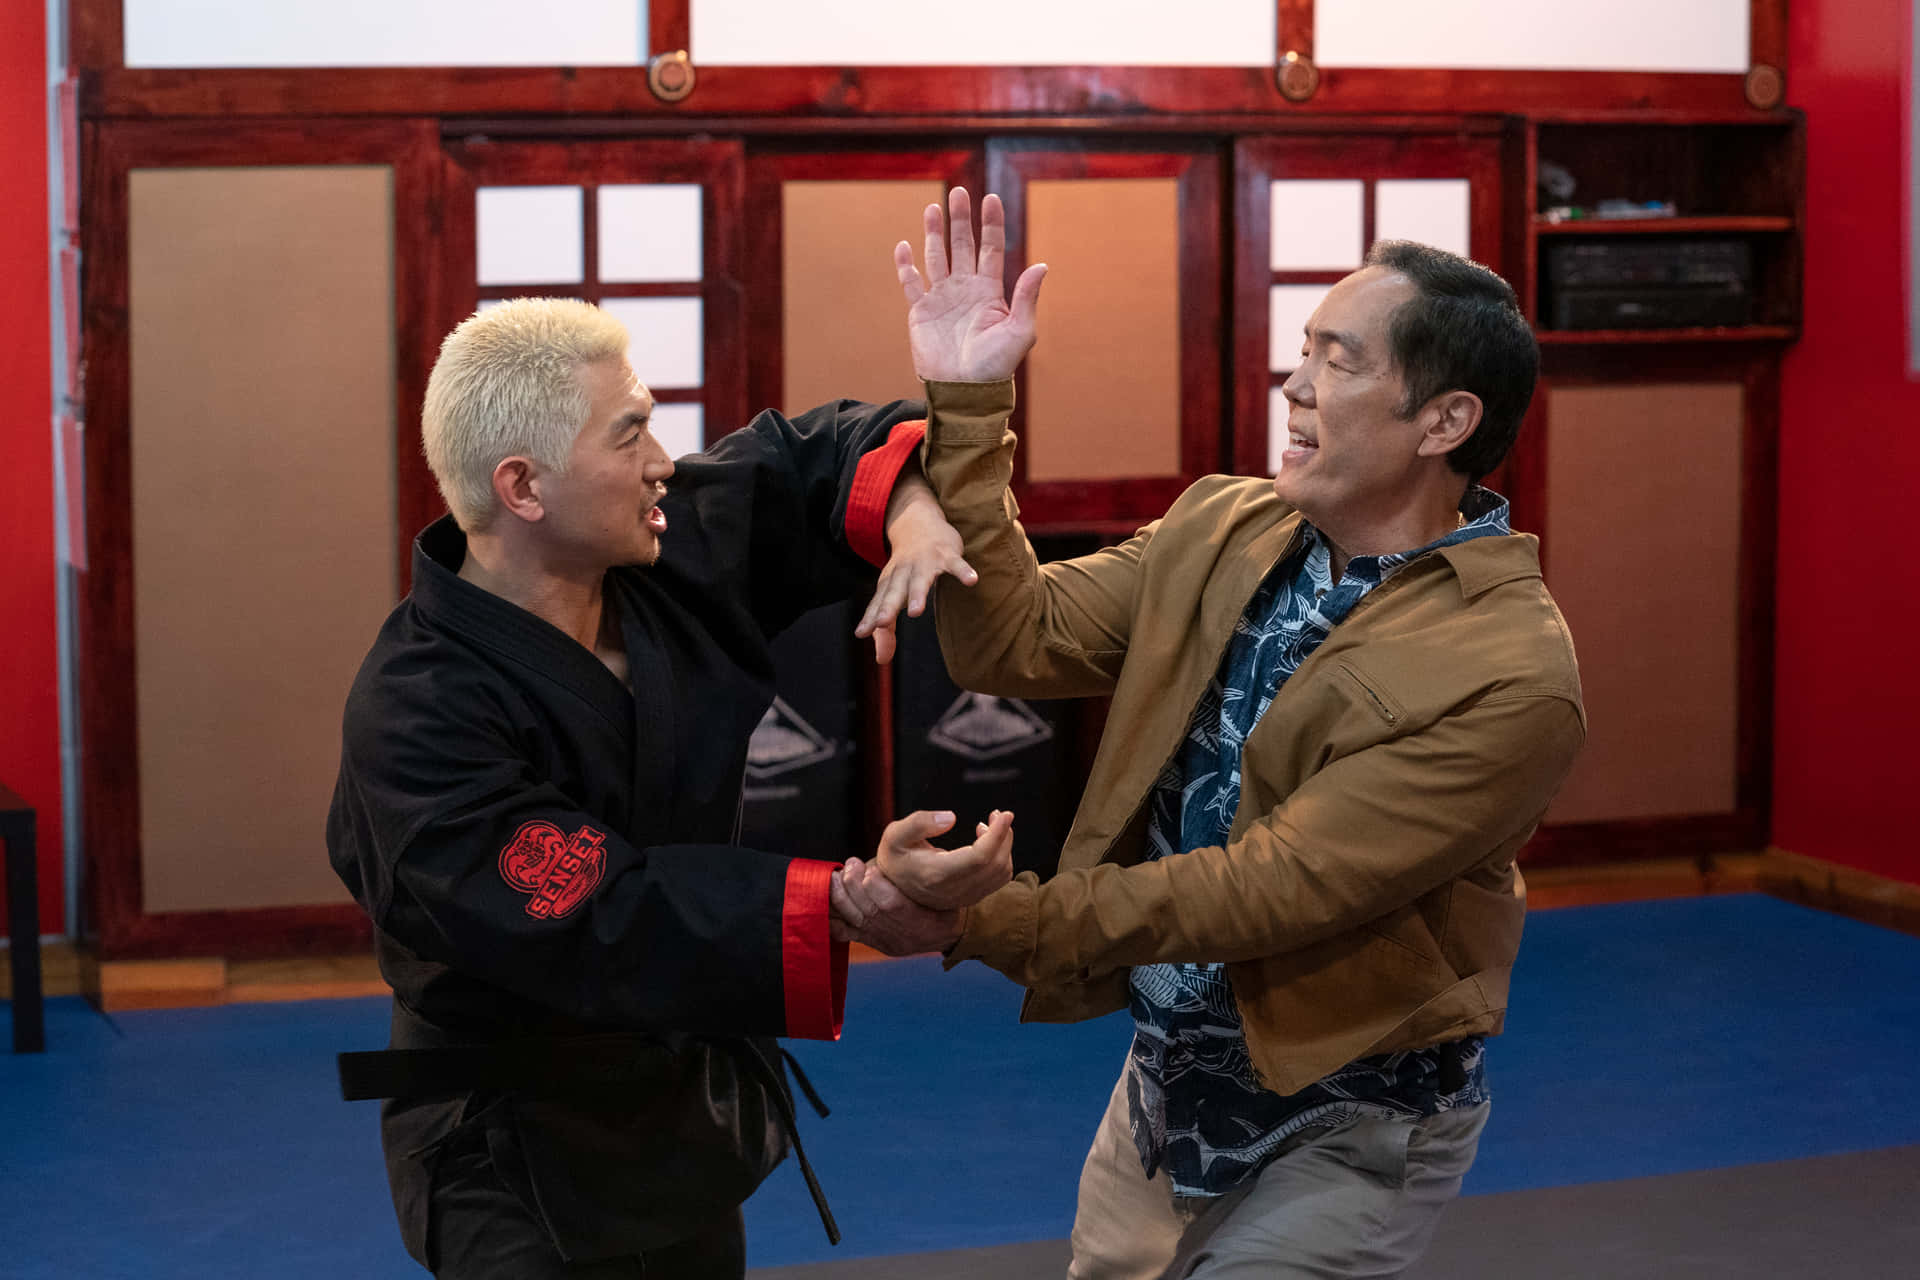 Two Men In A Martial Arts Class